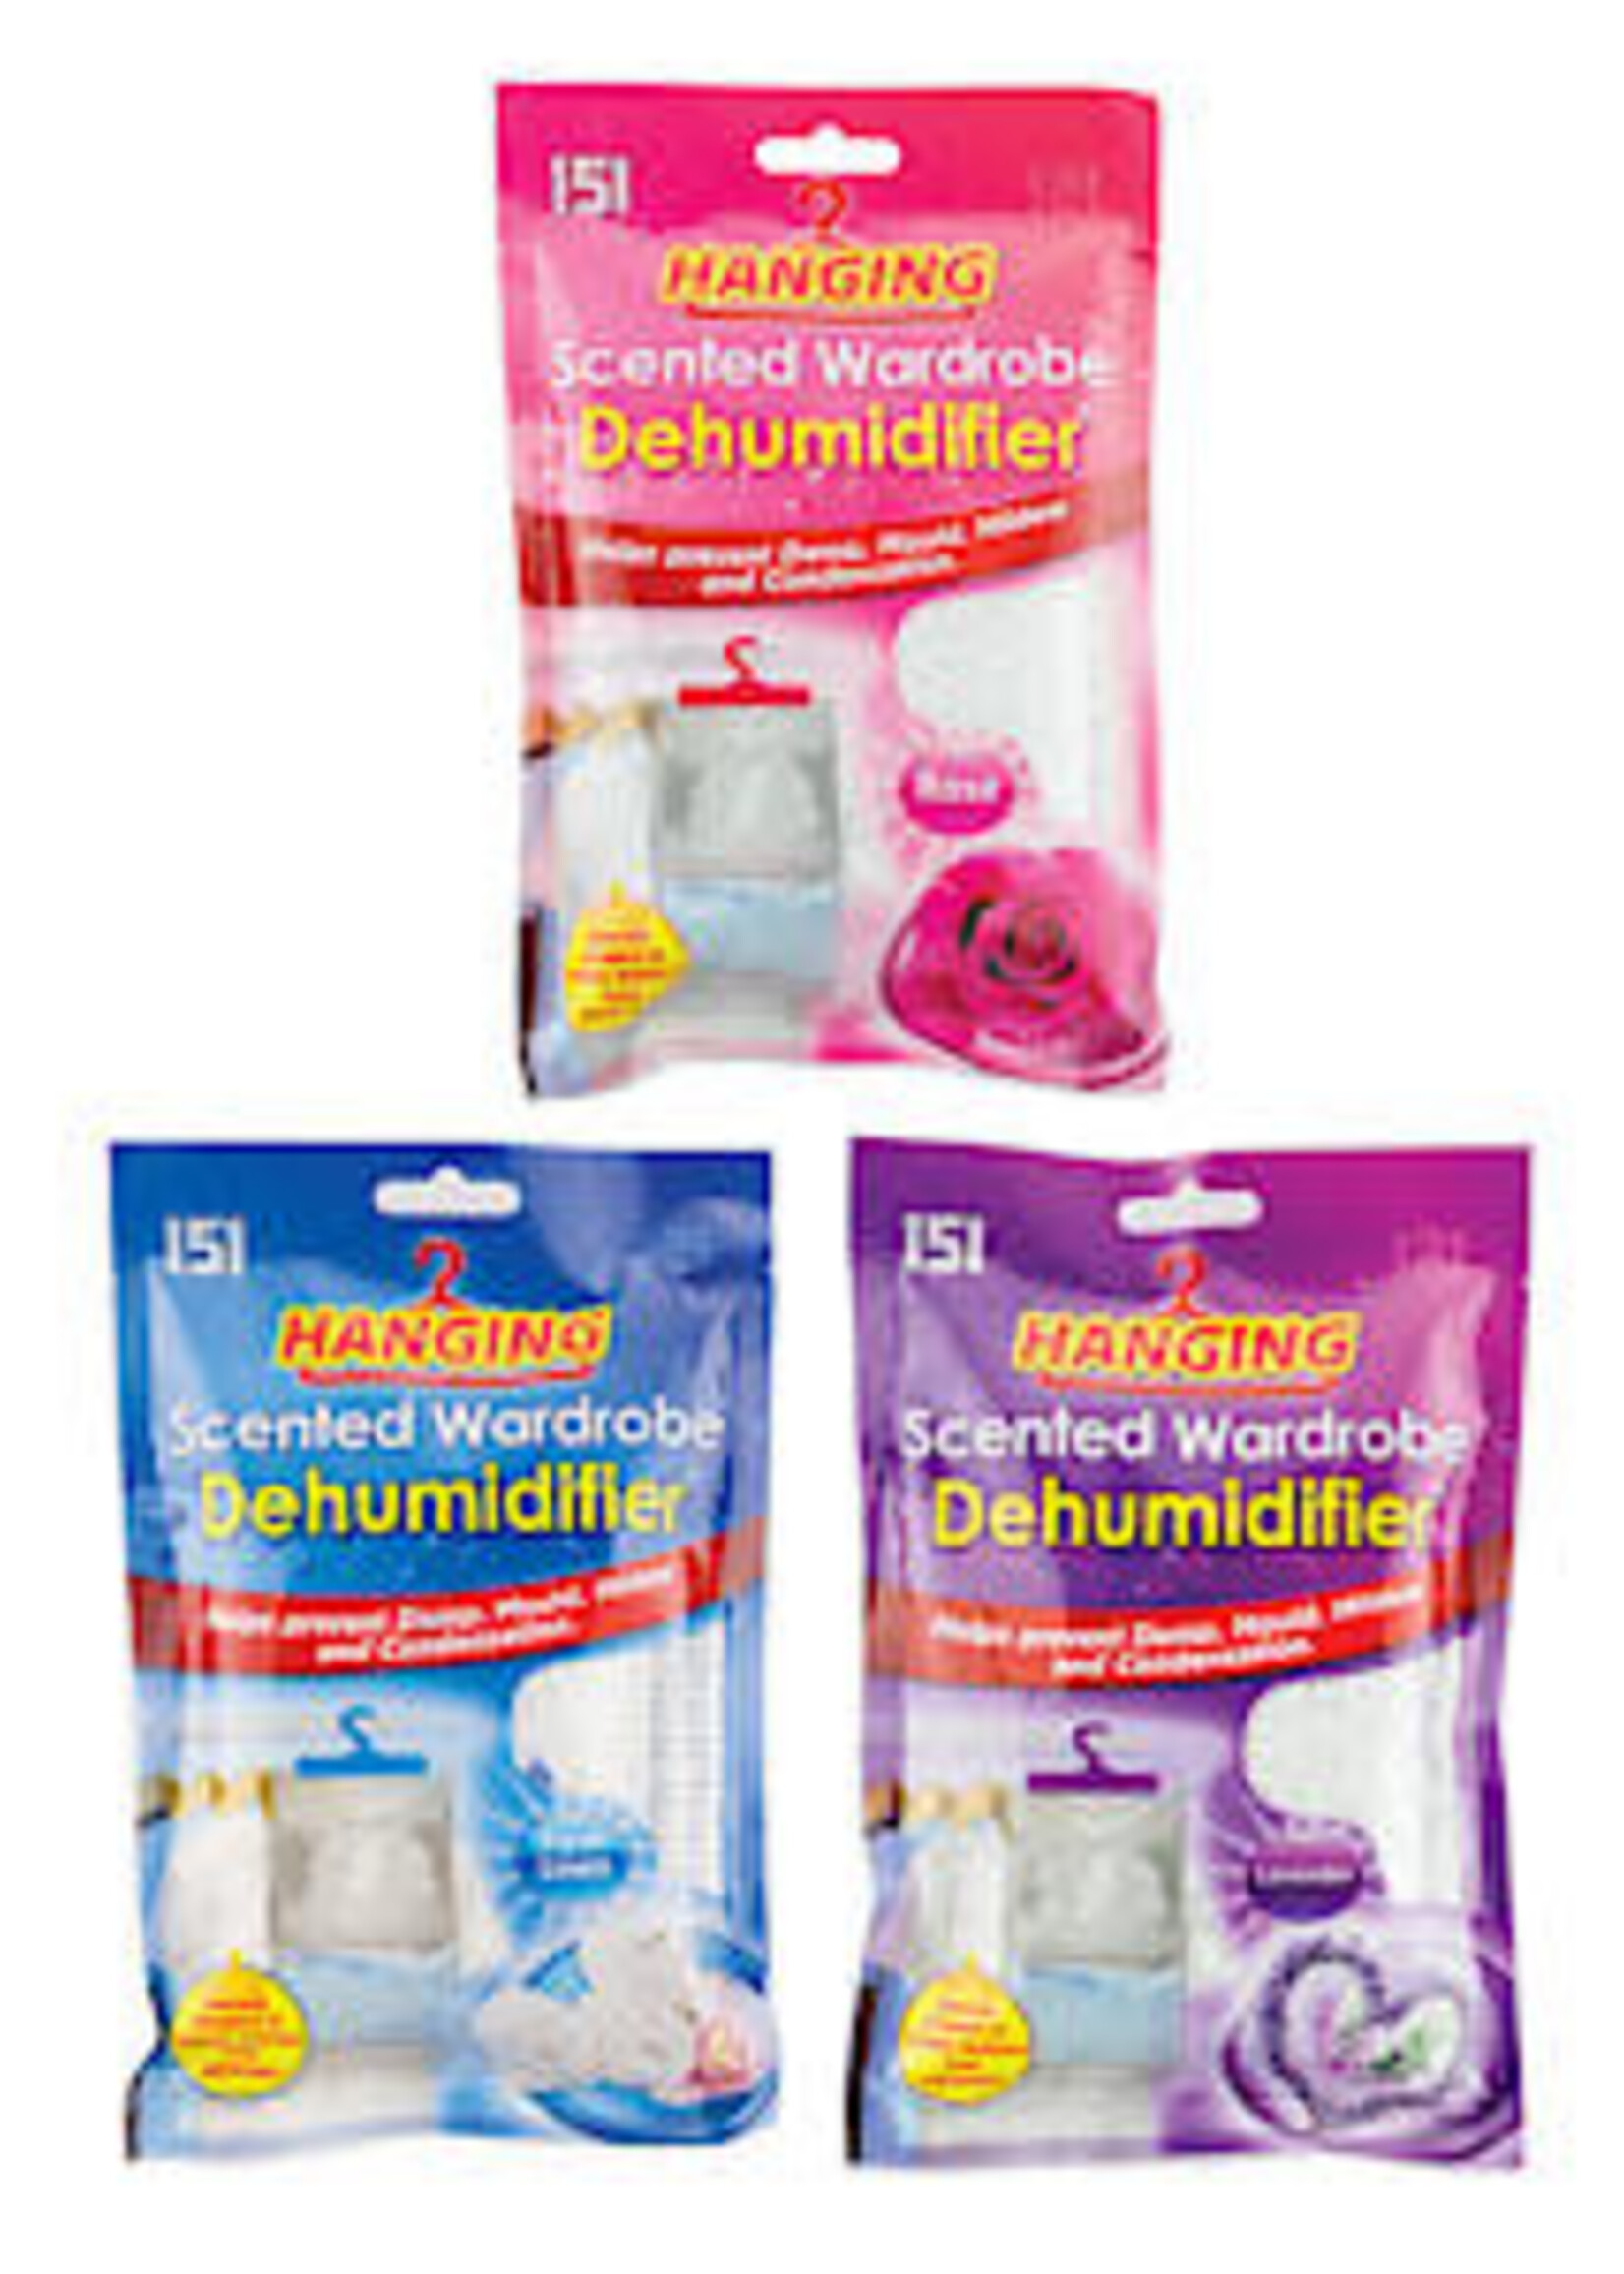 151 151 Hanging Wardrobe Dehumidifier Assorted Scents - price each